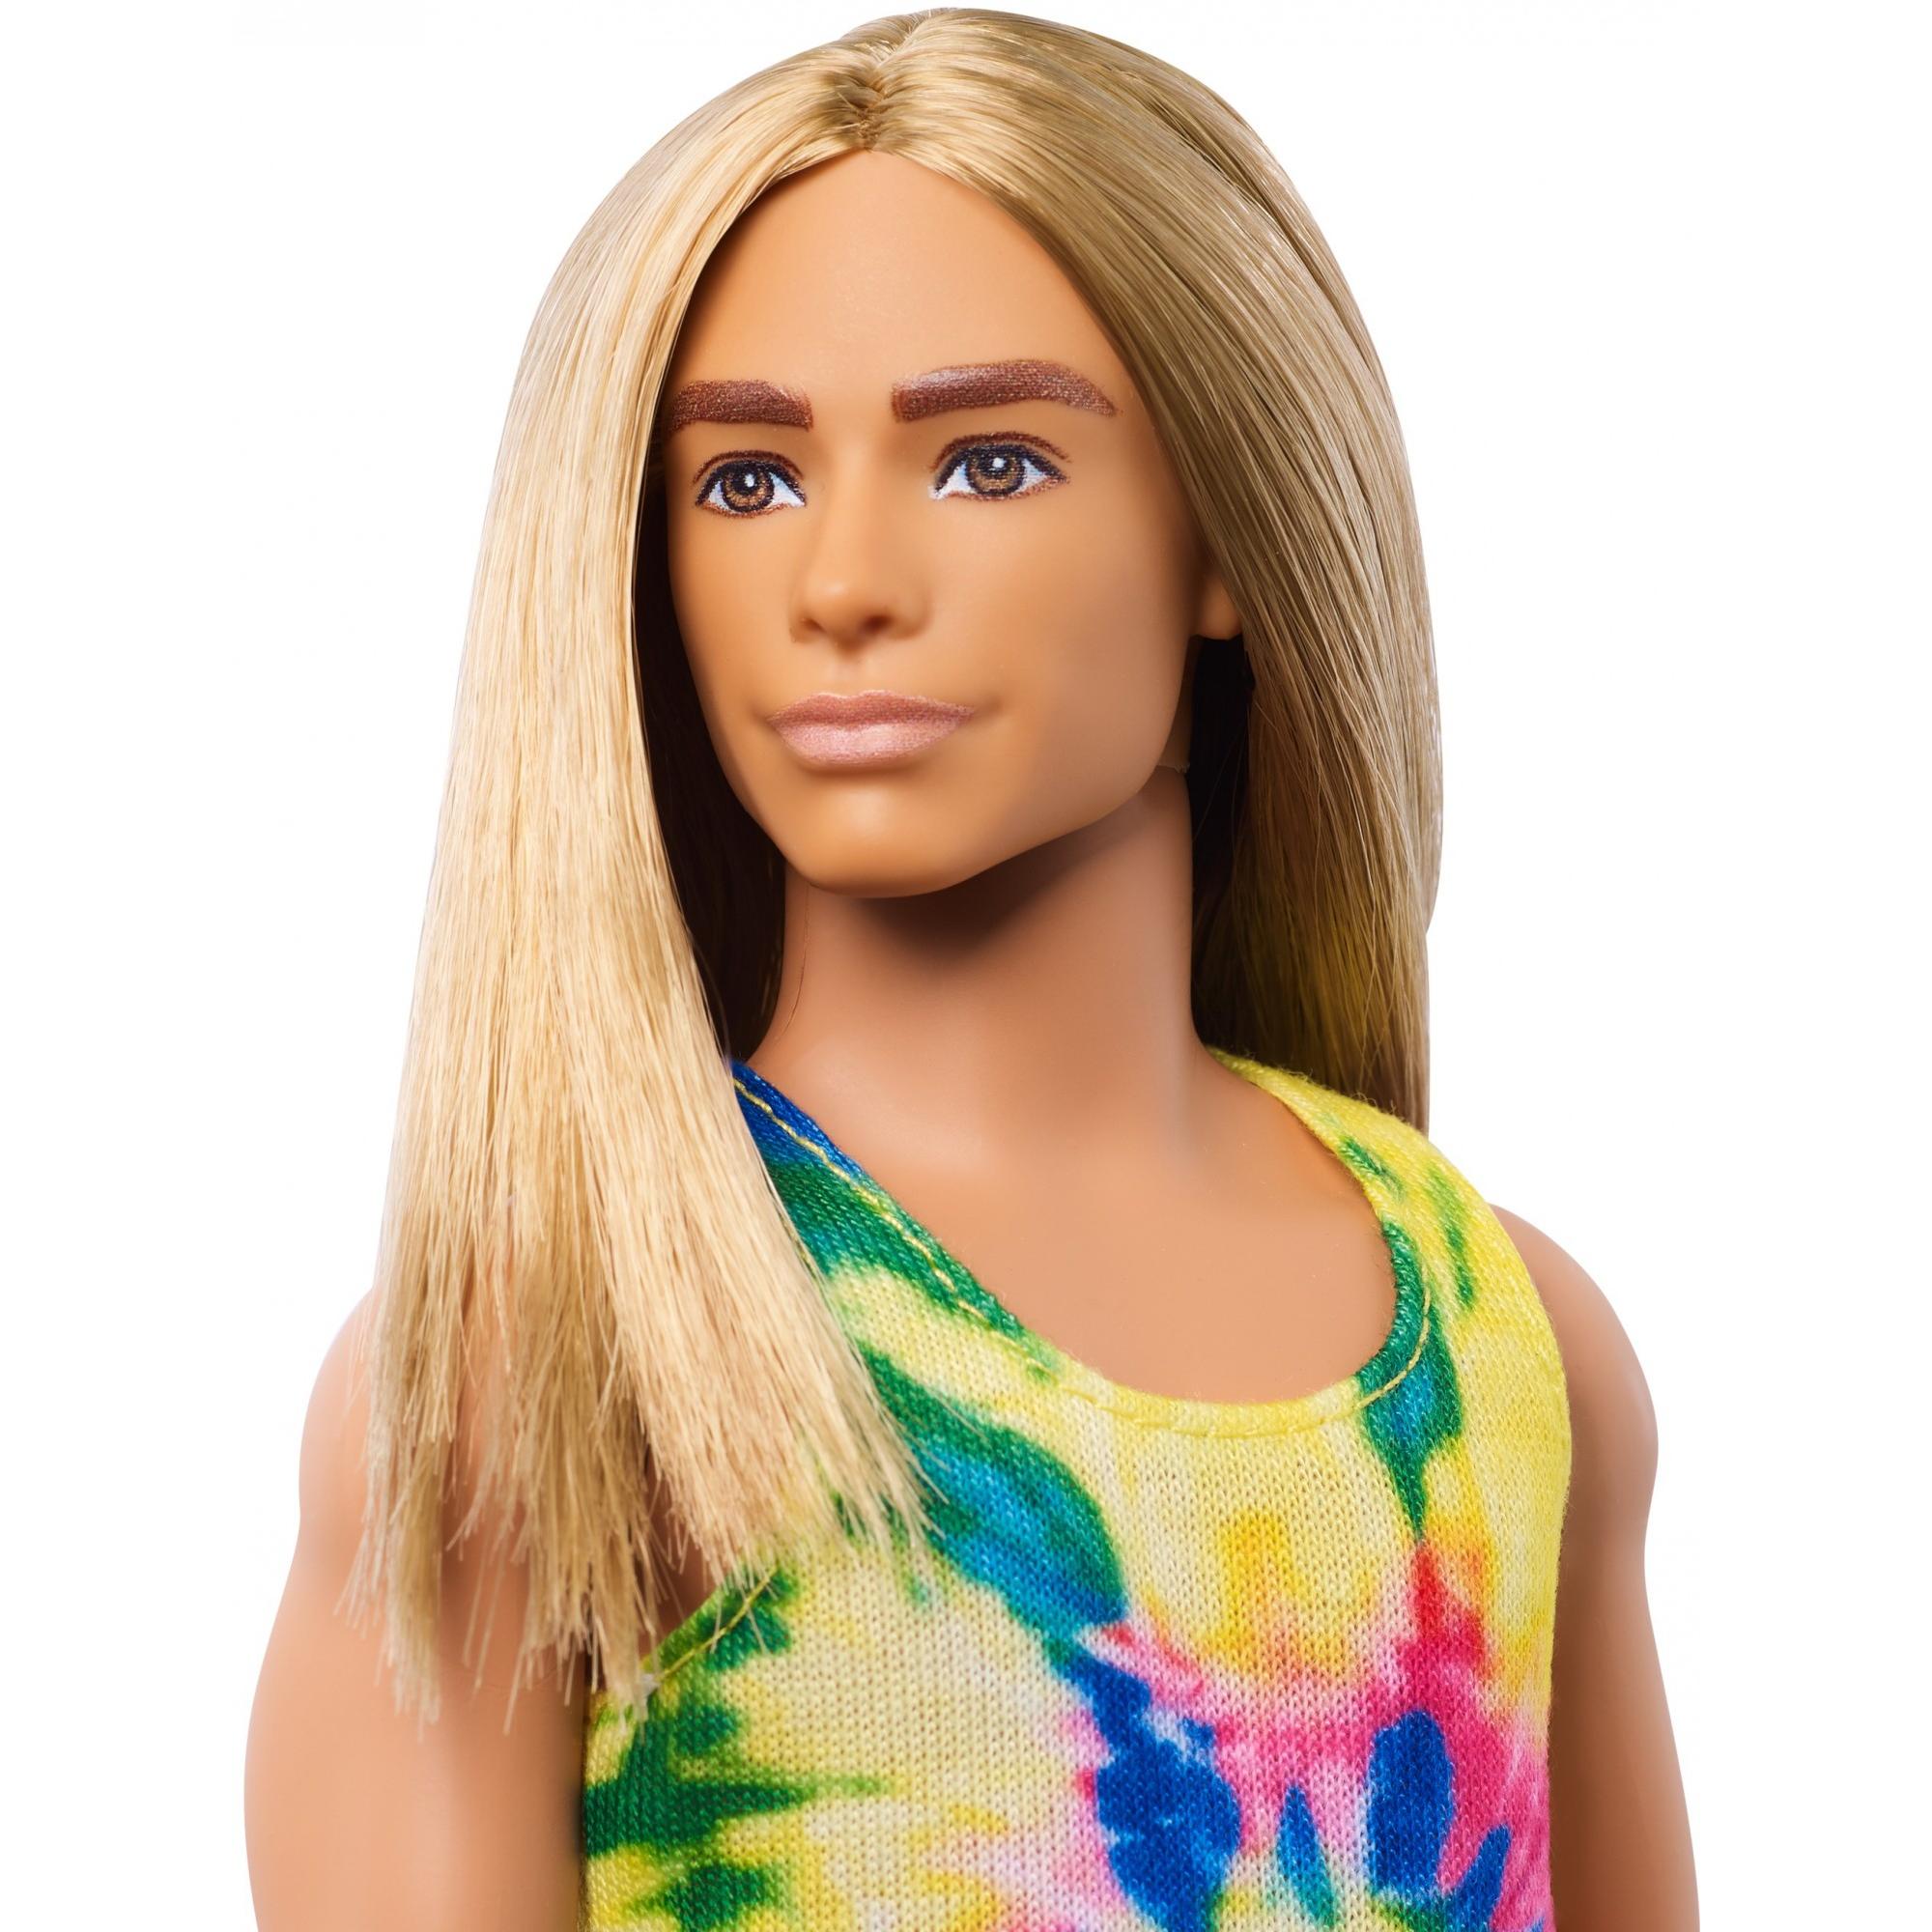 Ken Fashionistas Doll with Long Blonde Hair, Wearing Tie-Dye Shirt, Denim Shorts and Shoes, for 3 to 8 Year Olds - image 4 of 7